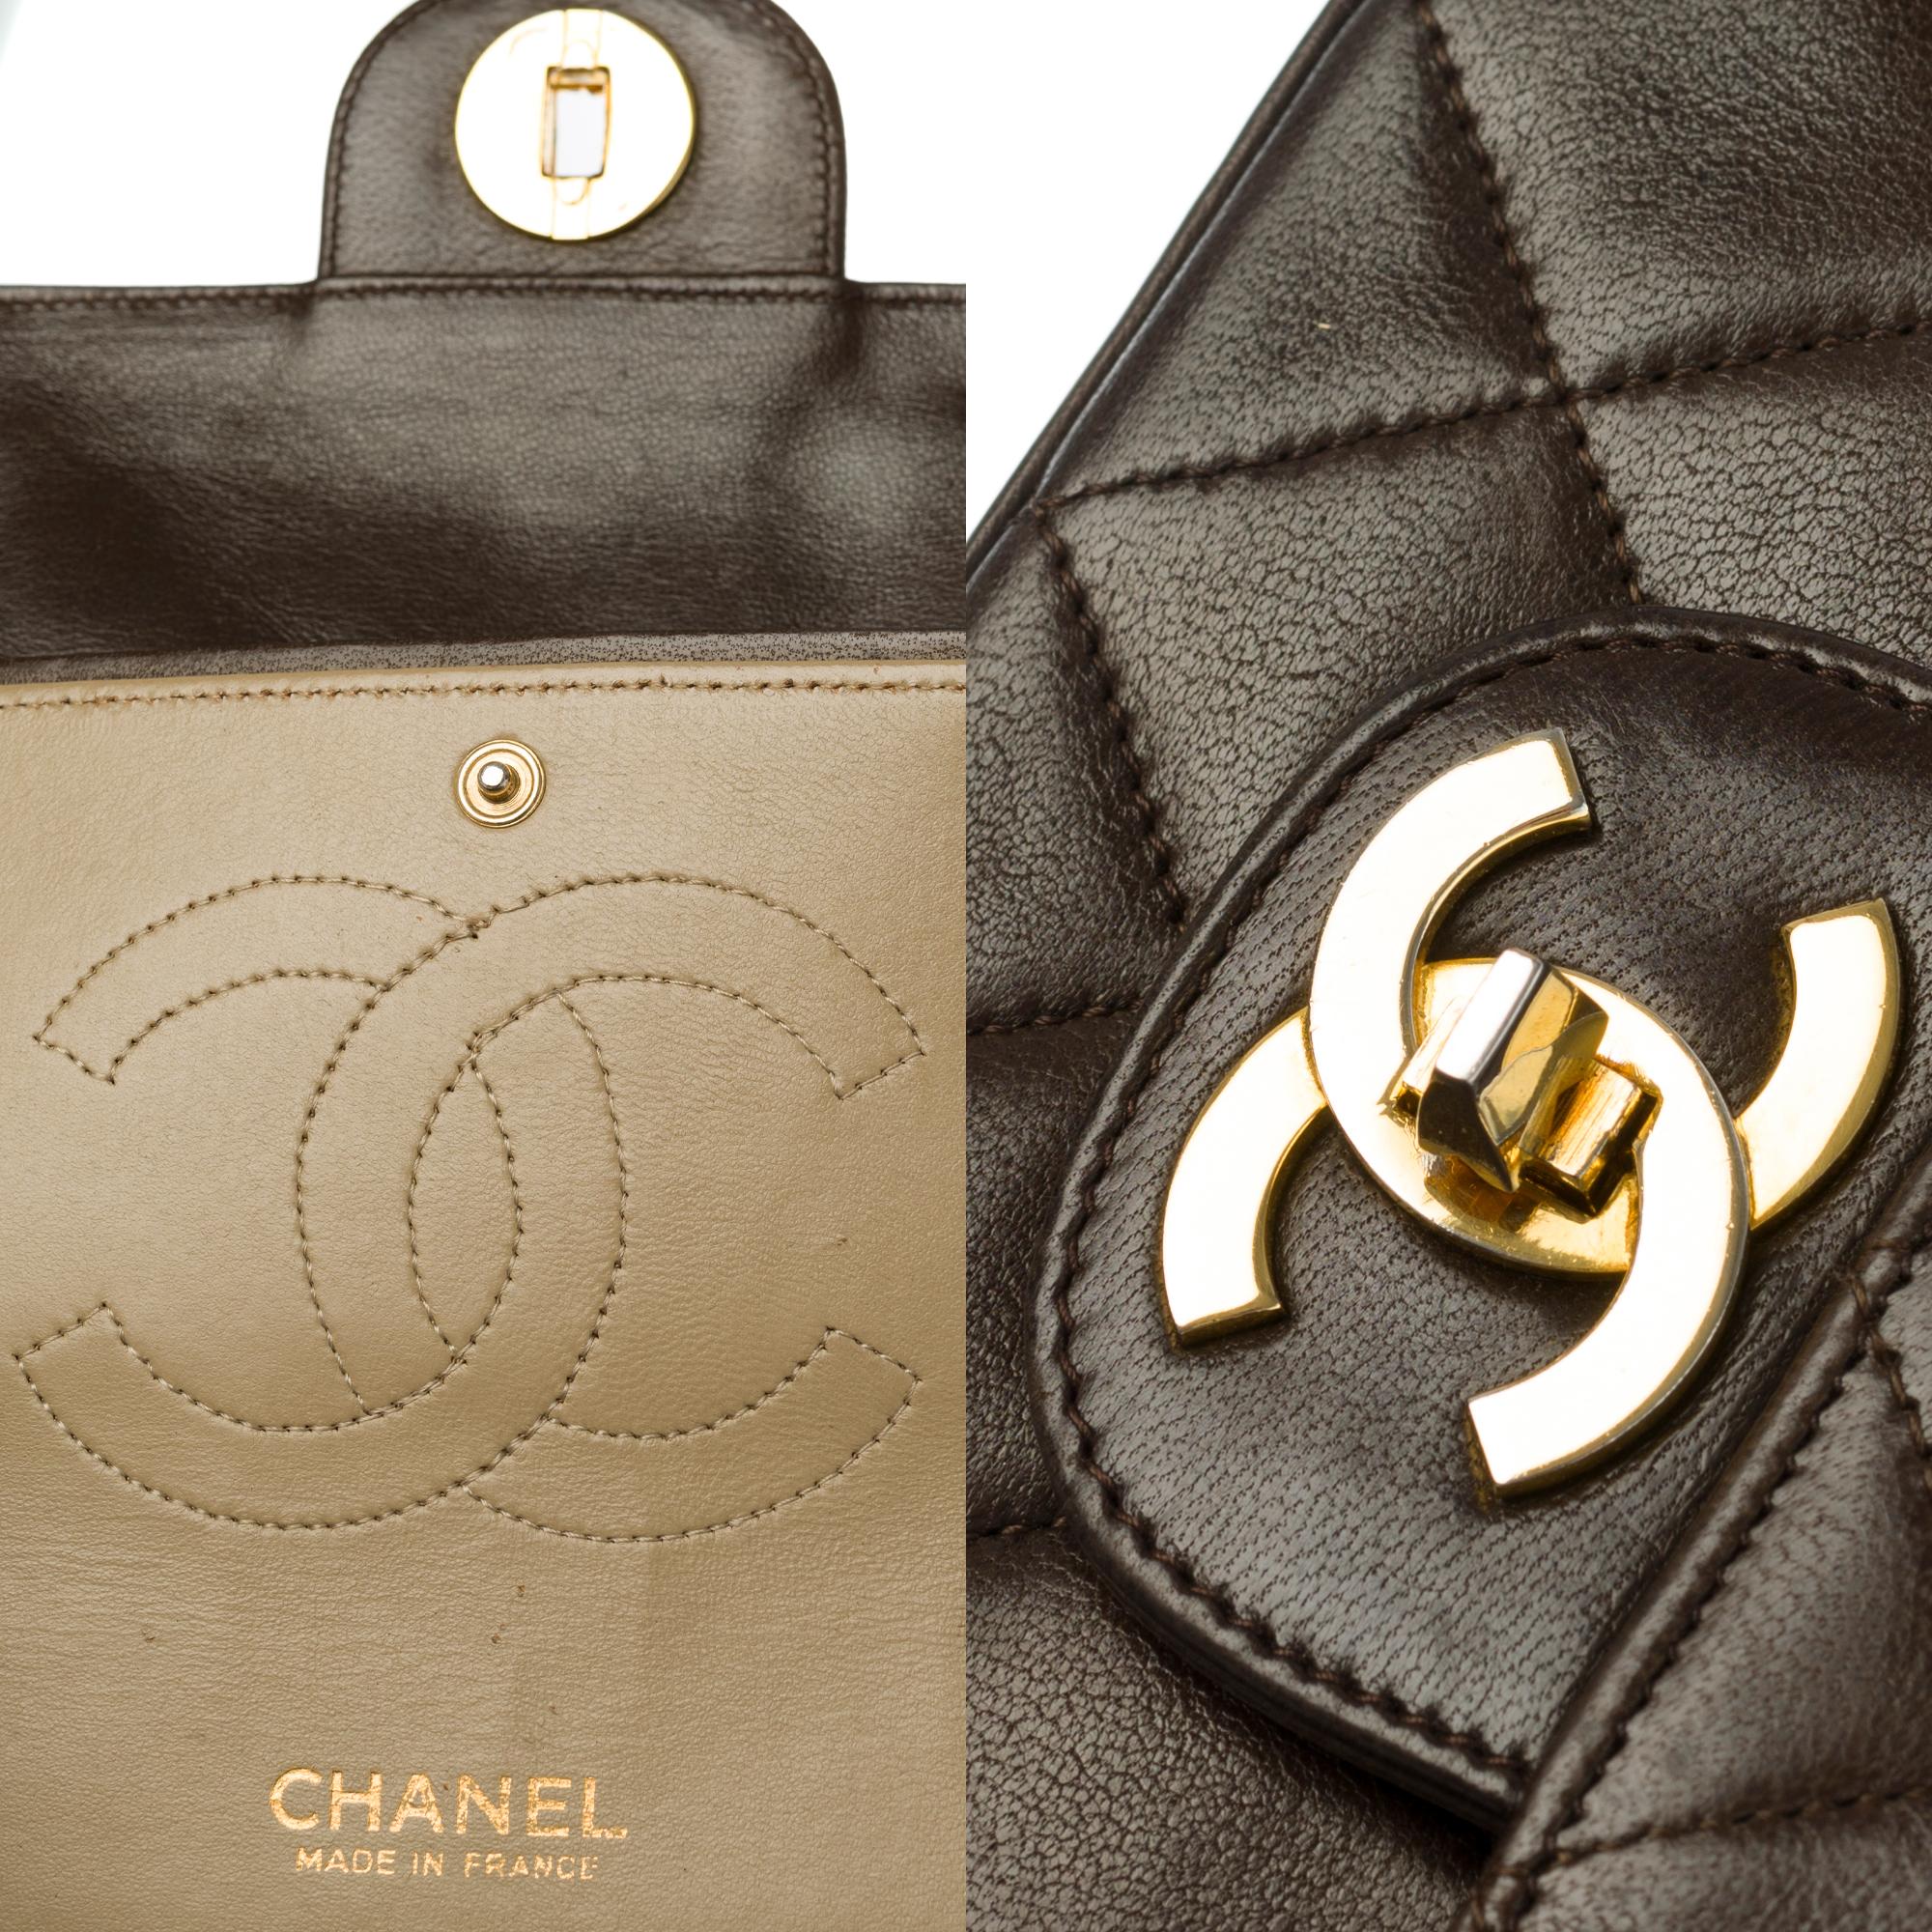 Women's Chanel Classic 27cm shoulder bag in brown quilted lambskin and gold hardware